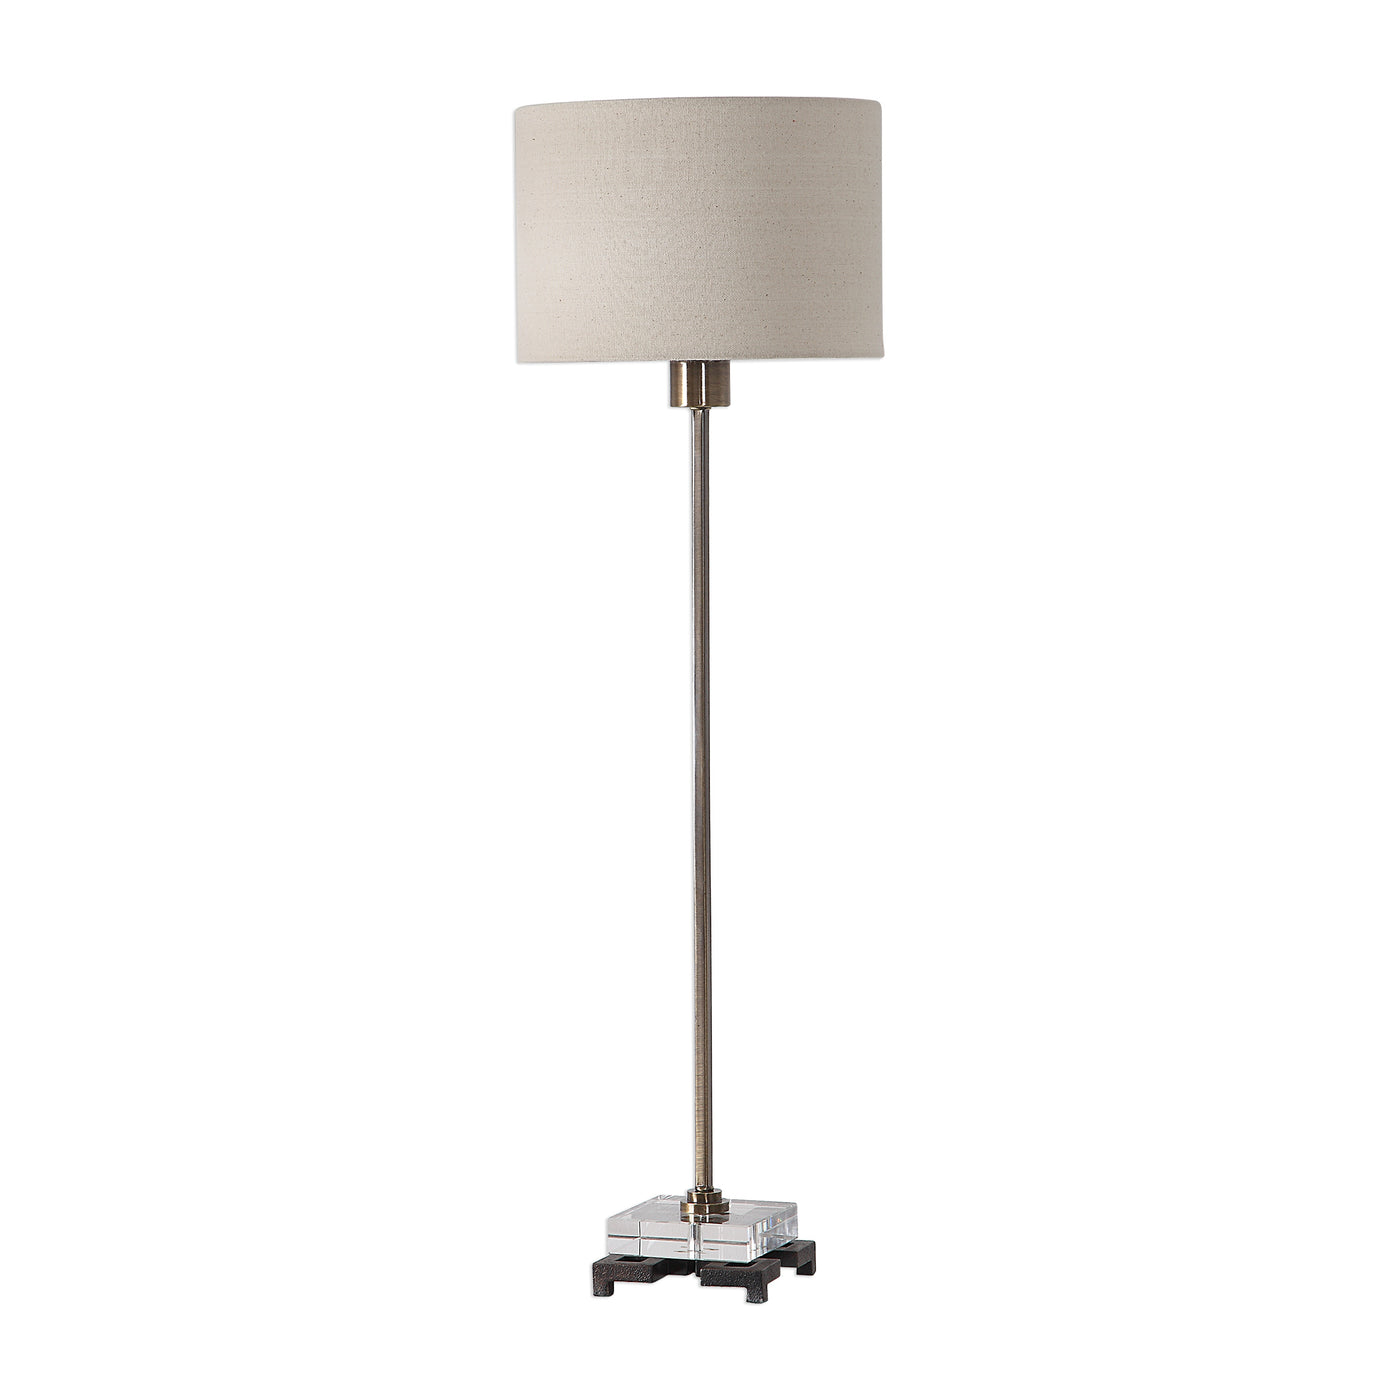 This Simple, Contemporary Table Lamp Features Clean Lines And A Versatile Style. The Iron Base Is Finished In A Plated Ant...